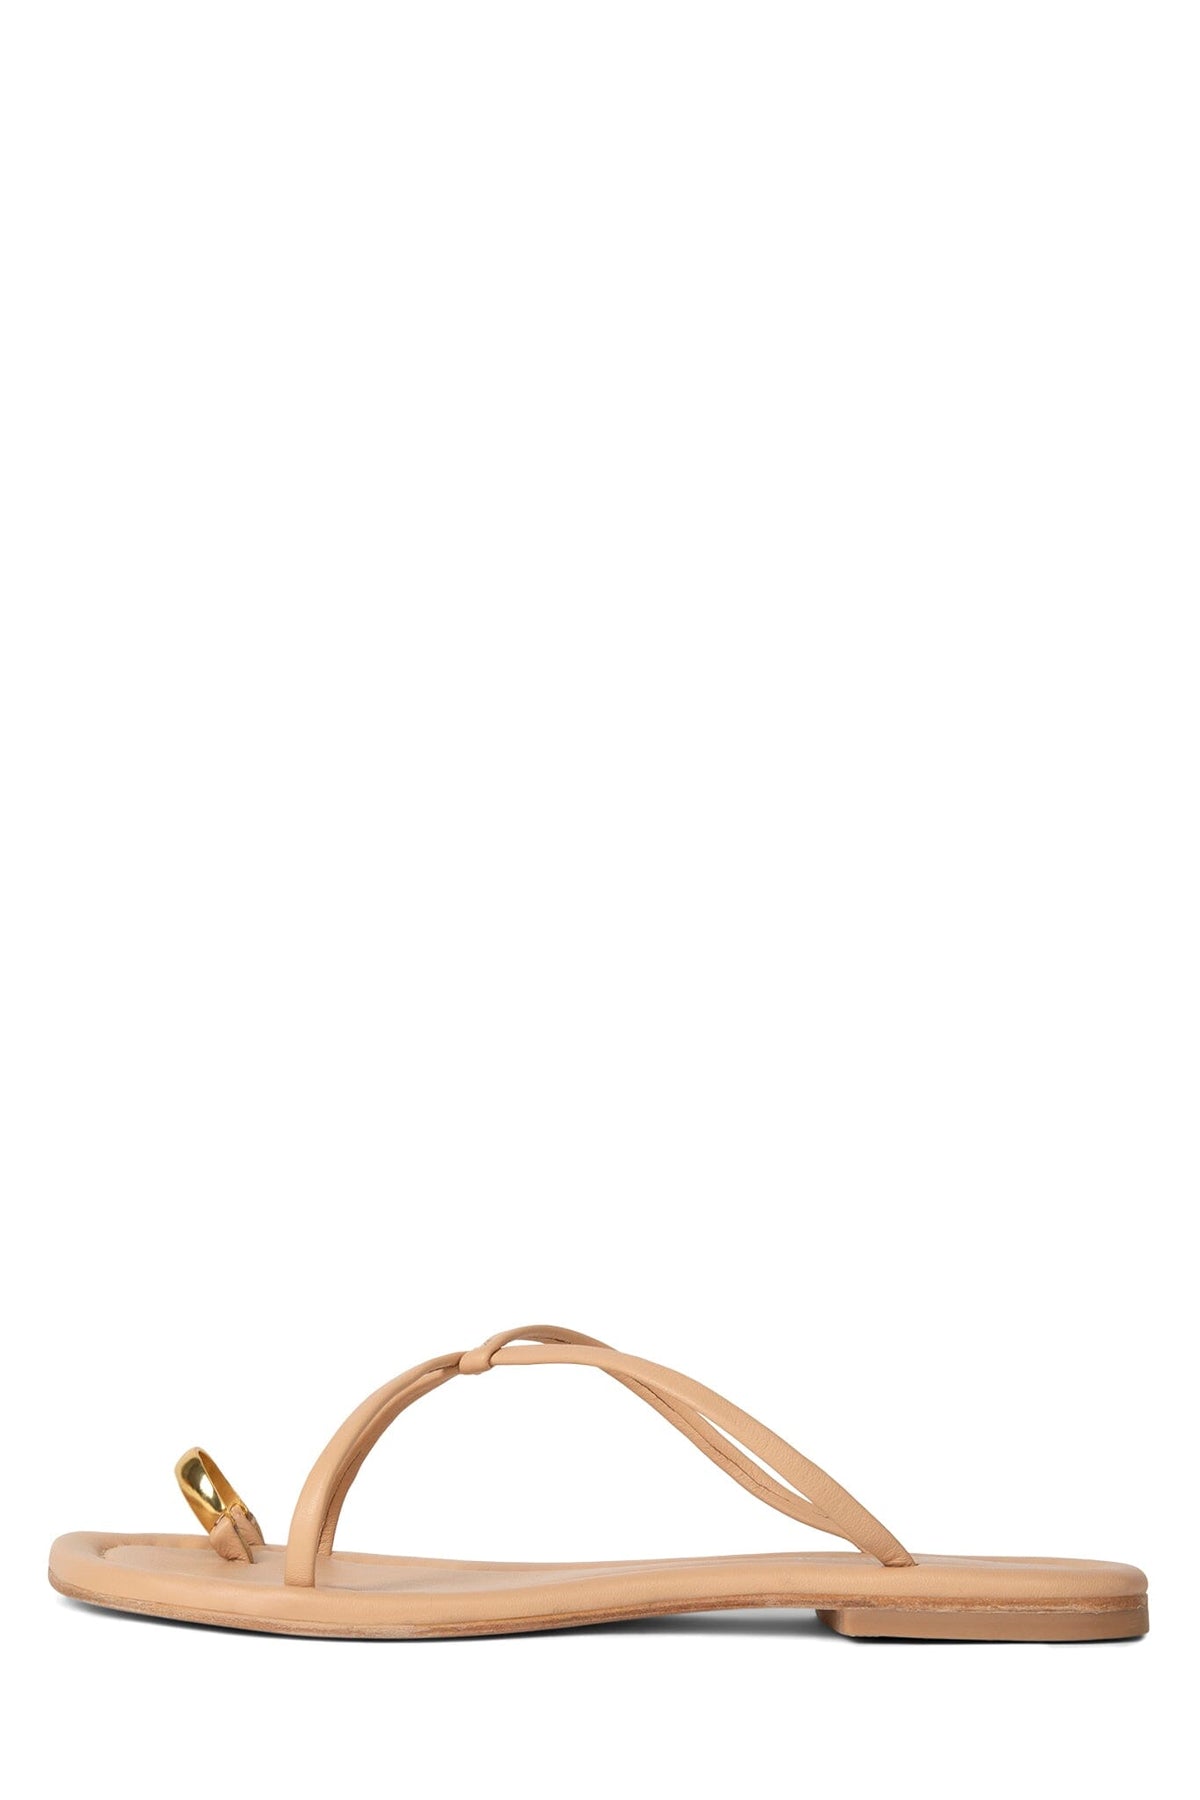 PACIFICO Jeffrey Campbell Flat Sandals Beige Gold